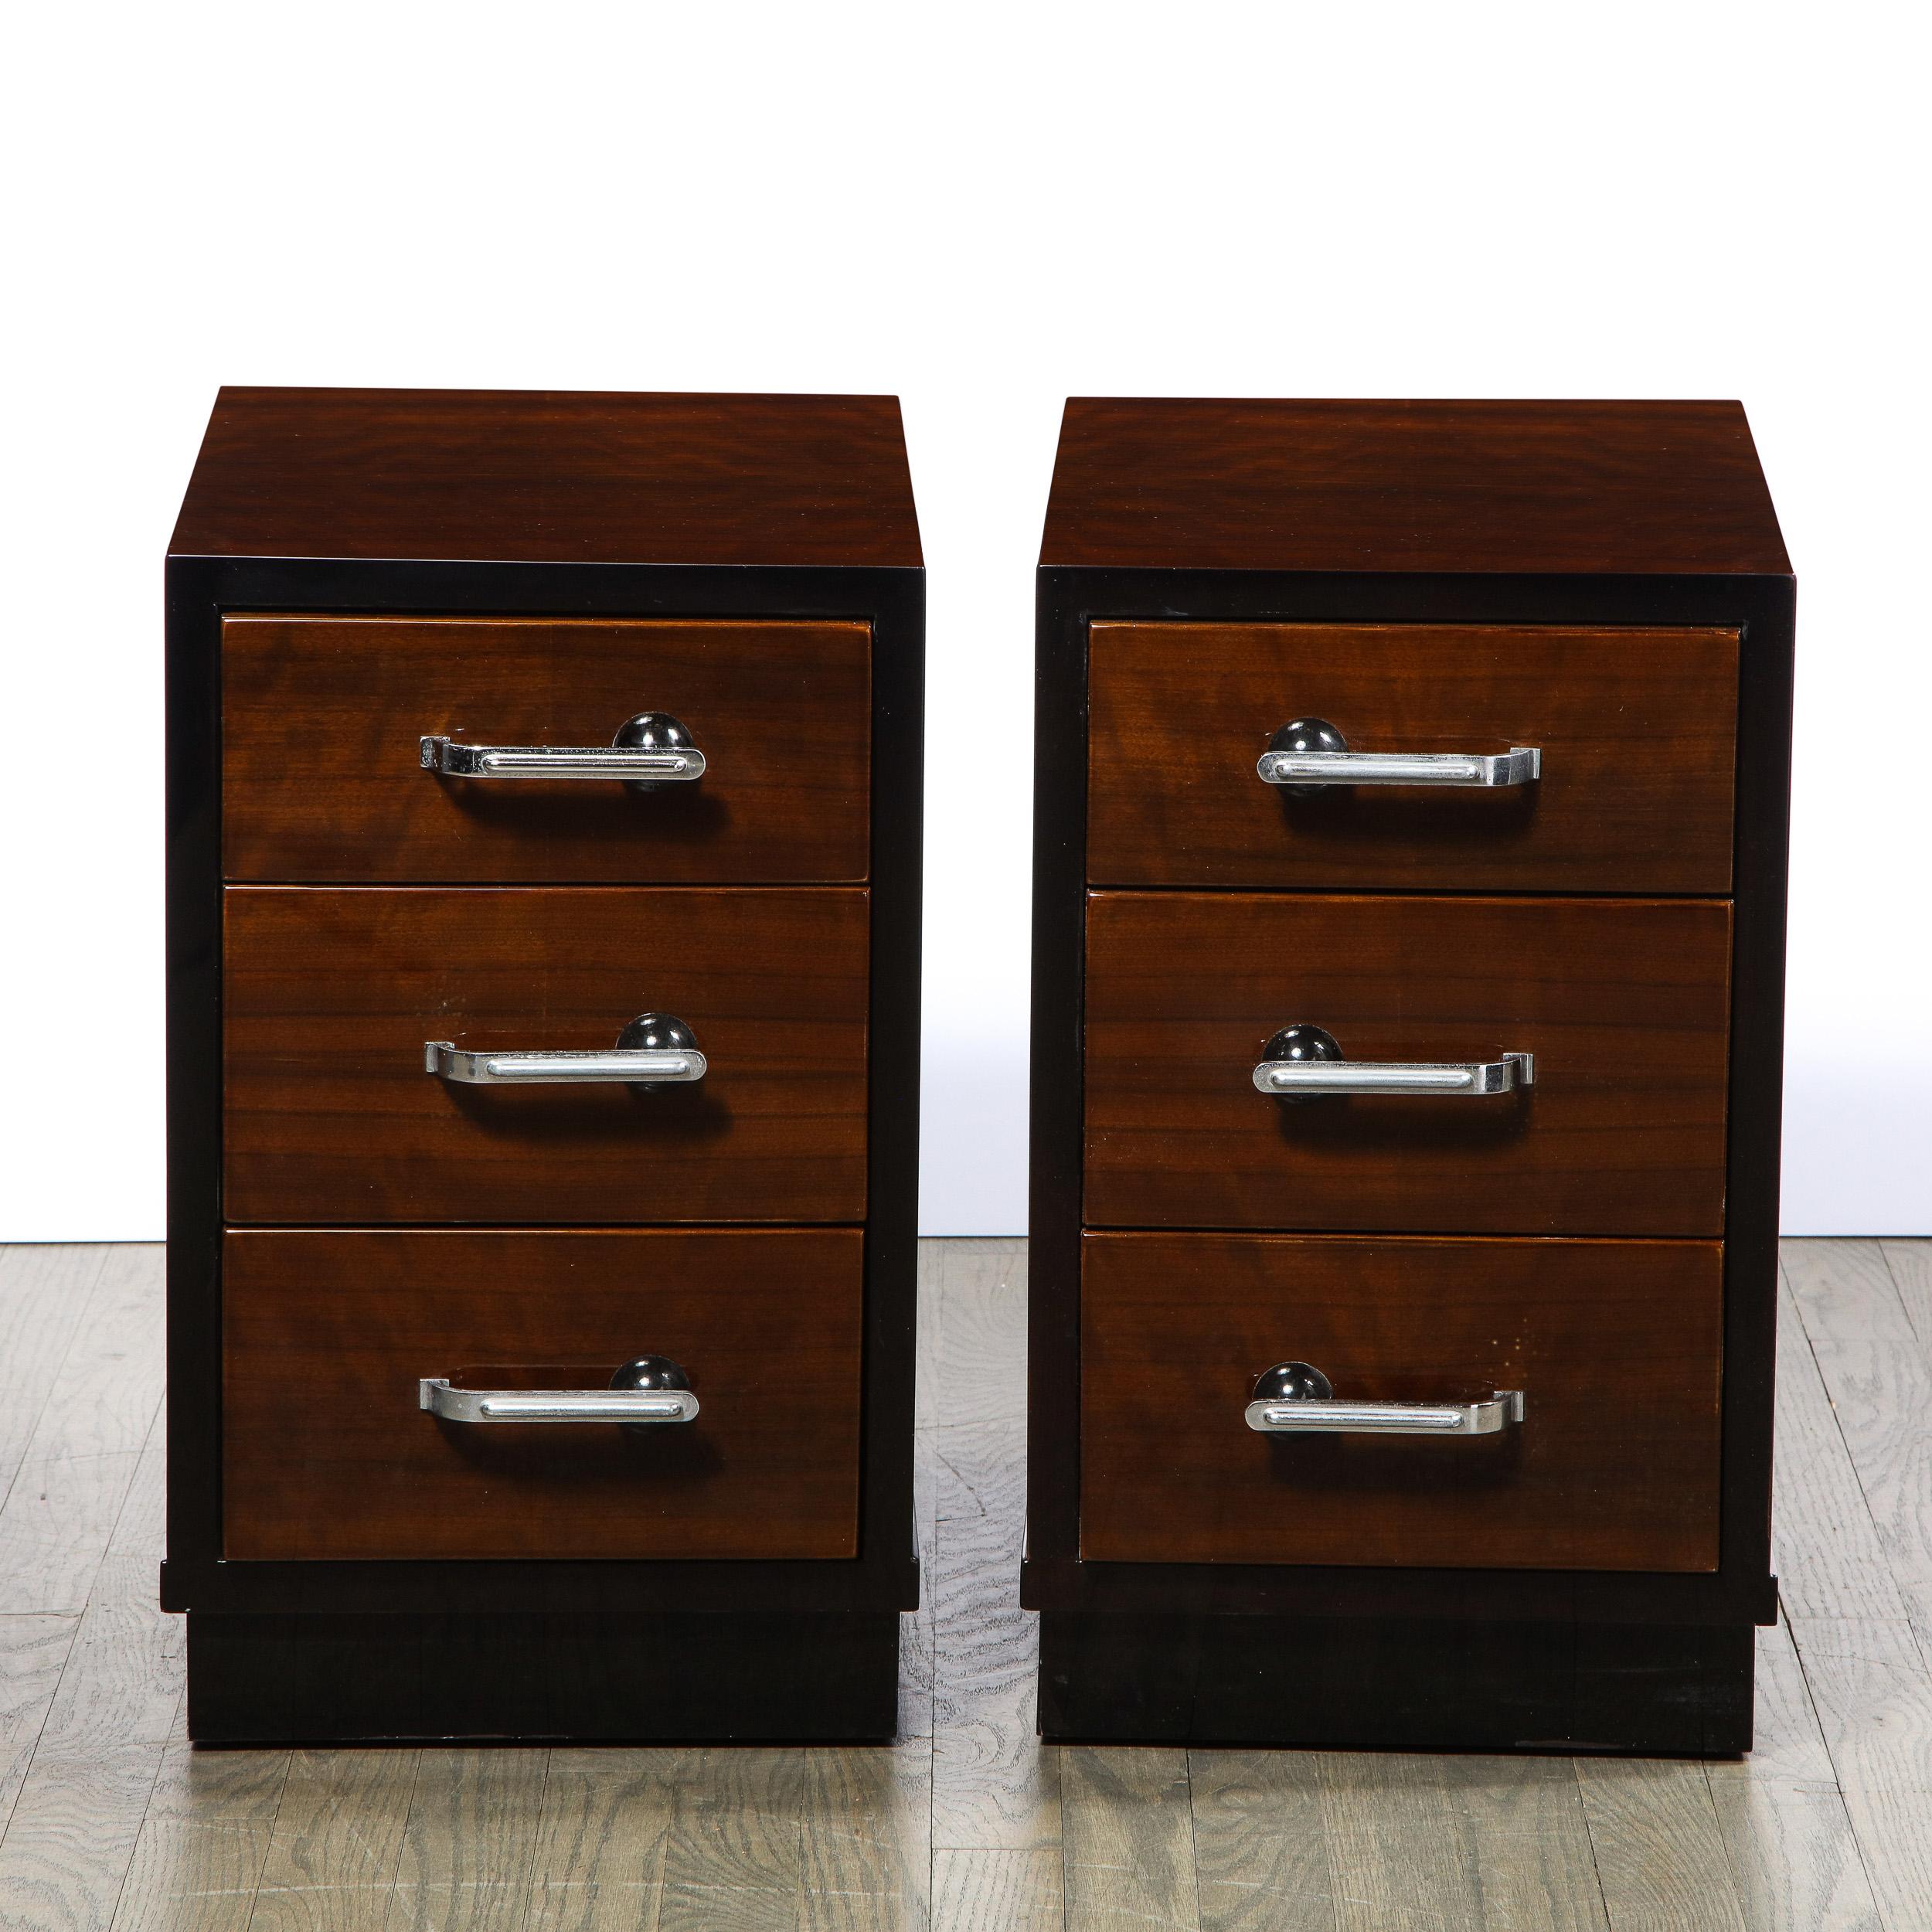 This stunning pair of Machine Age bookmatched walnut and black lacquer nightstands were realized in the United States circa 1935. They feature volumetric rectangular bodies with three drawers framed in black lacquer- all crafted in bookmatched